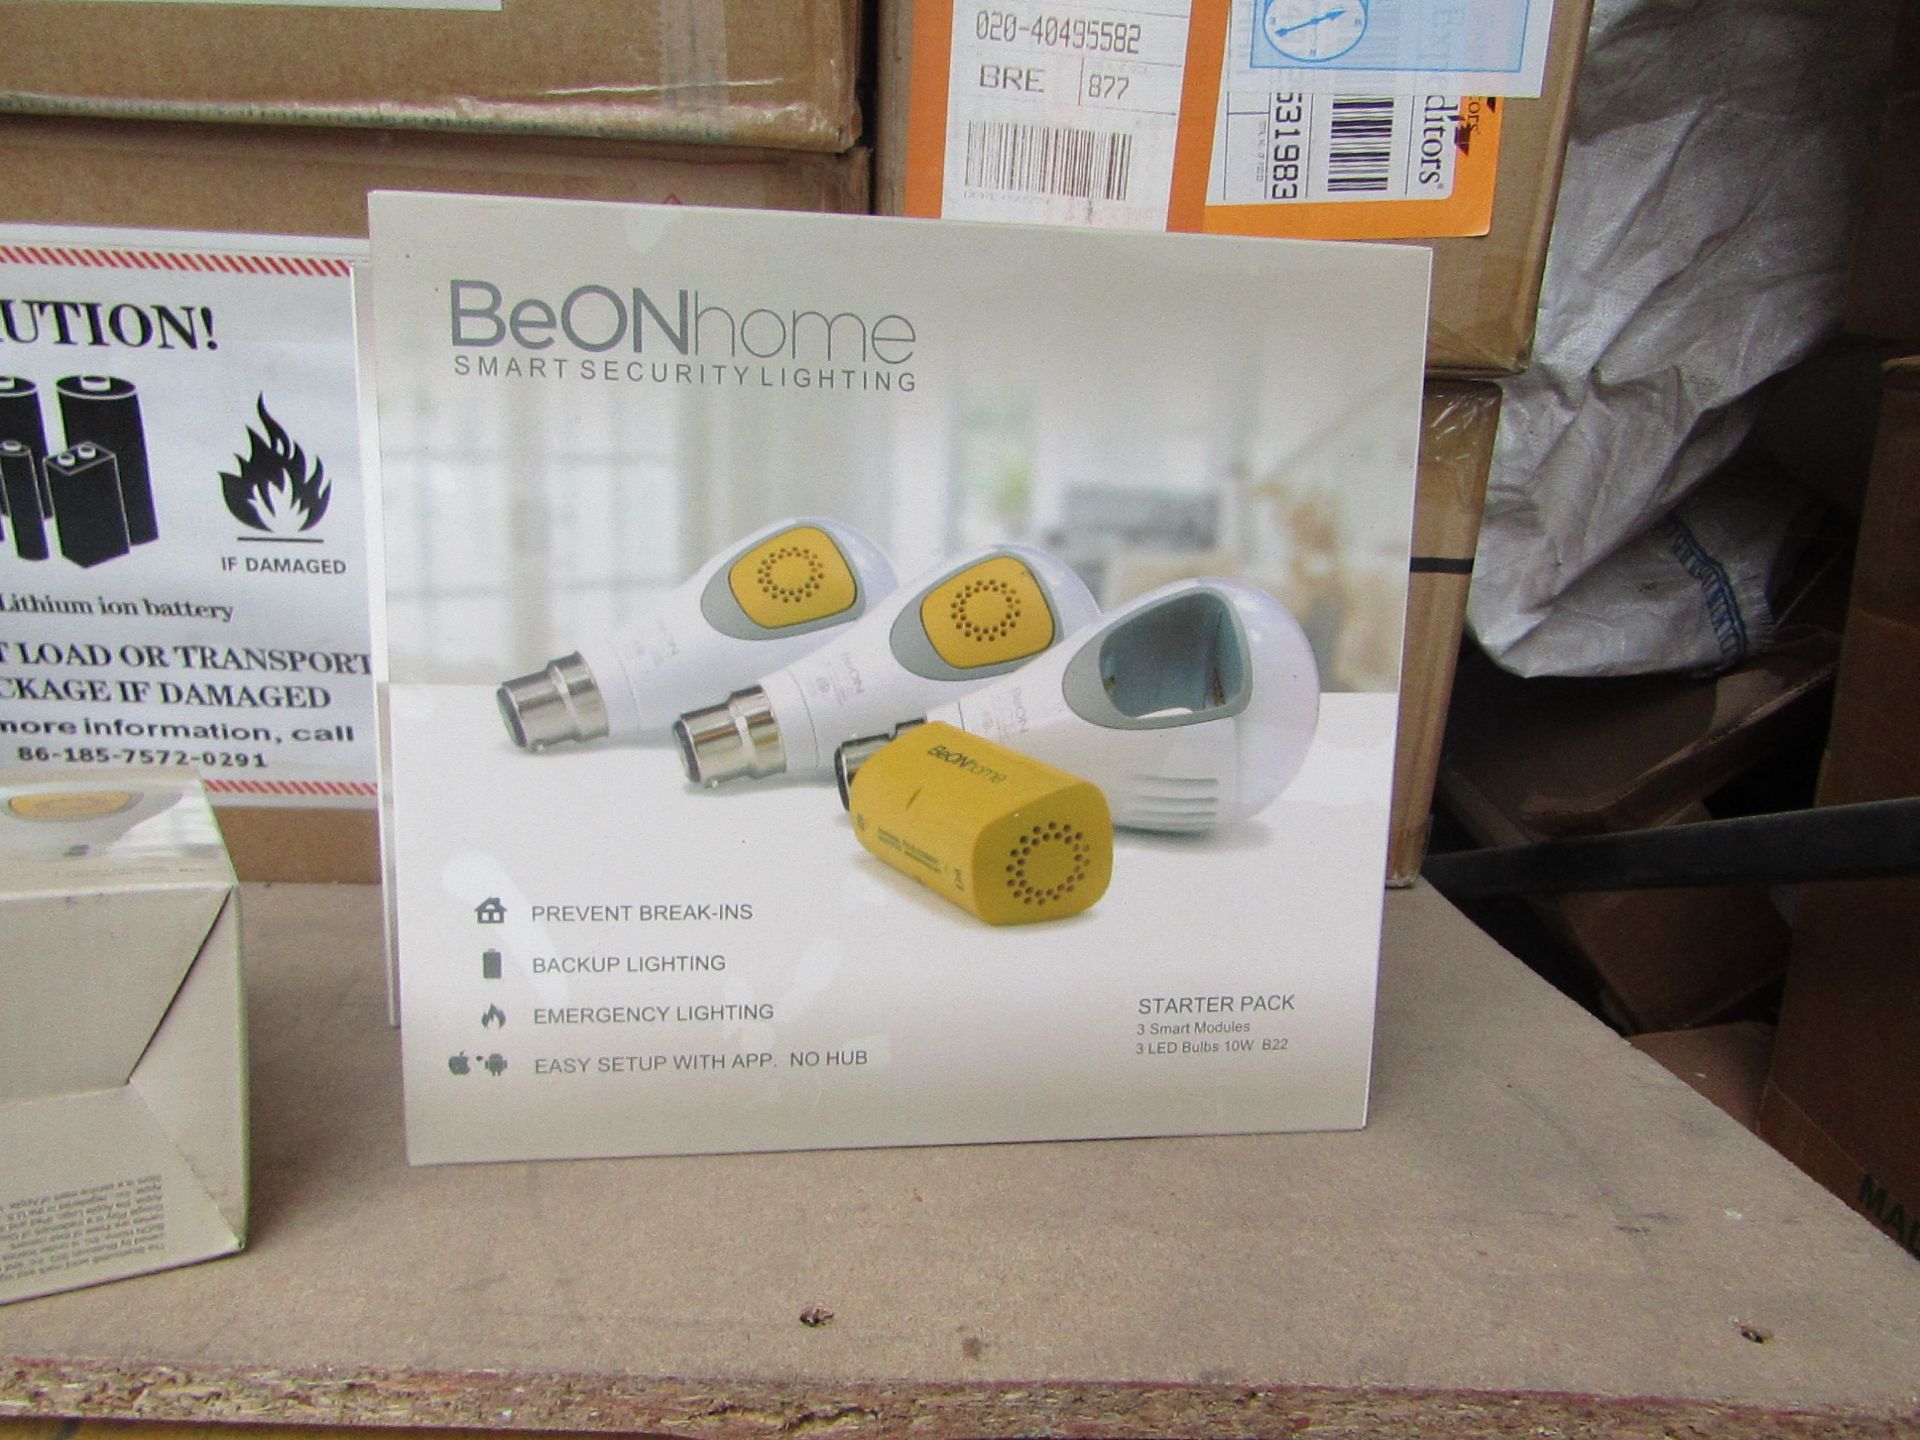 12x BeON Home smart light bulb starter pack includes 3 smart modules and 3 B22 LED bulbs, with a